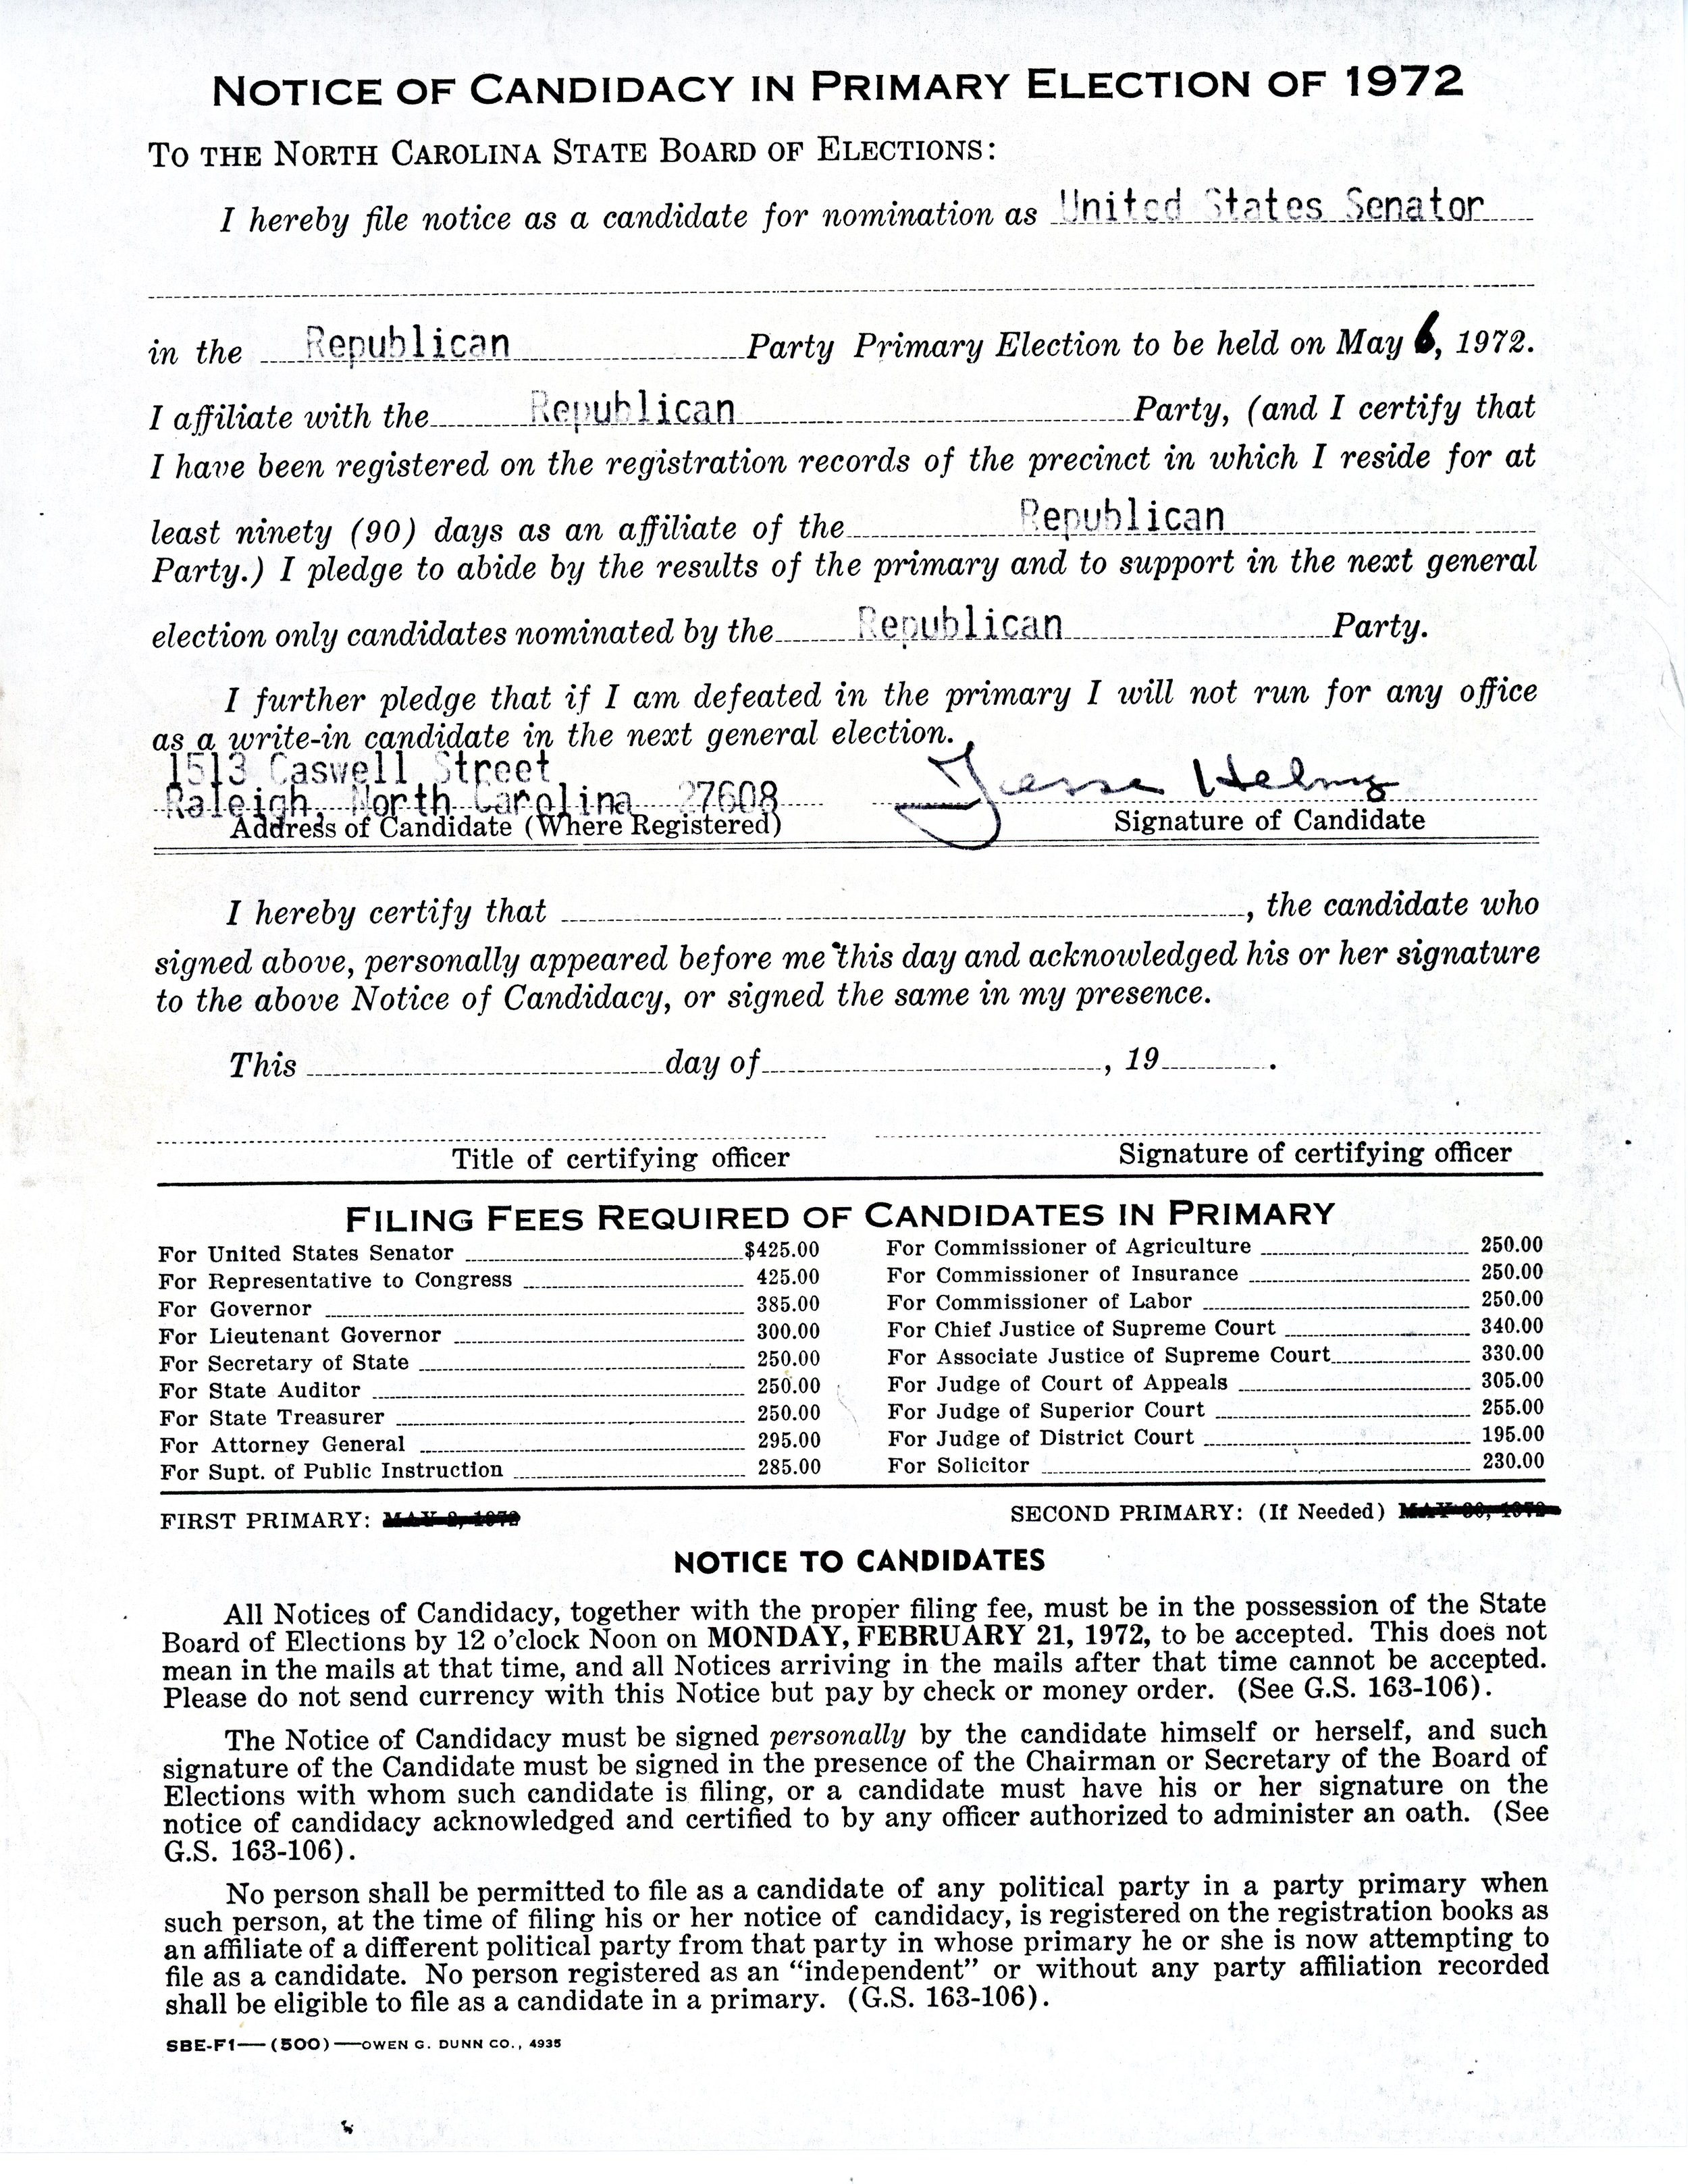 Notice of Candidacy in Primary Election of 1972, signed by Jesse Helms